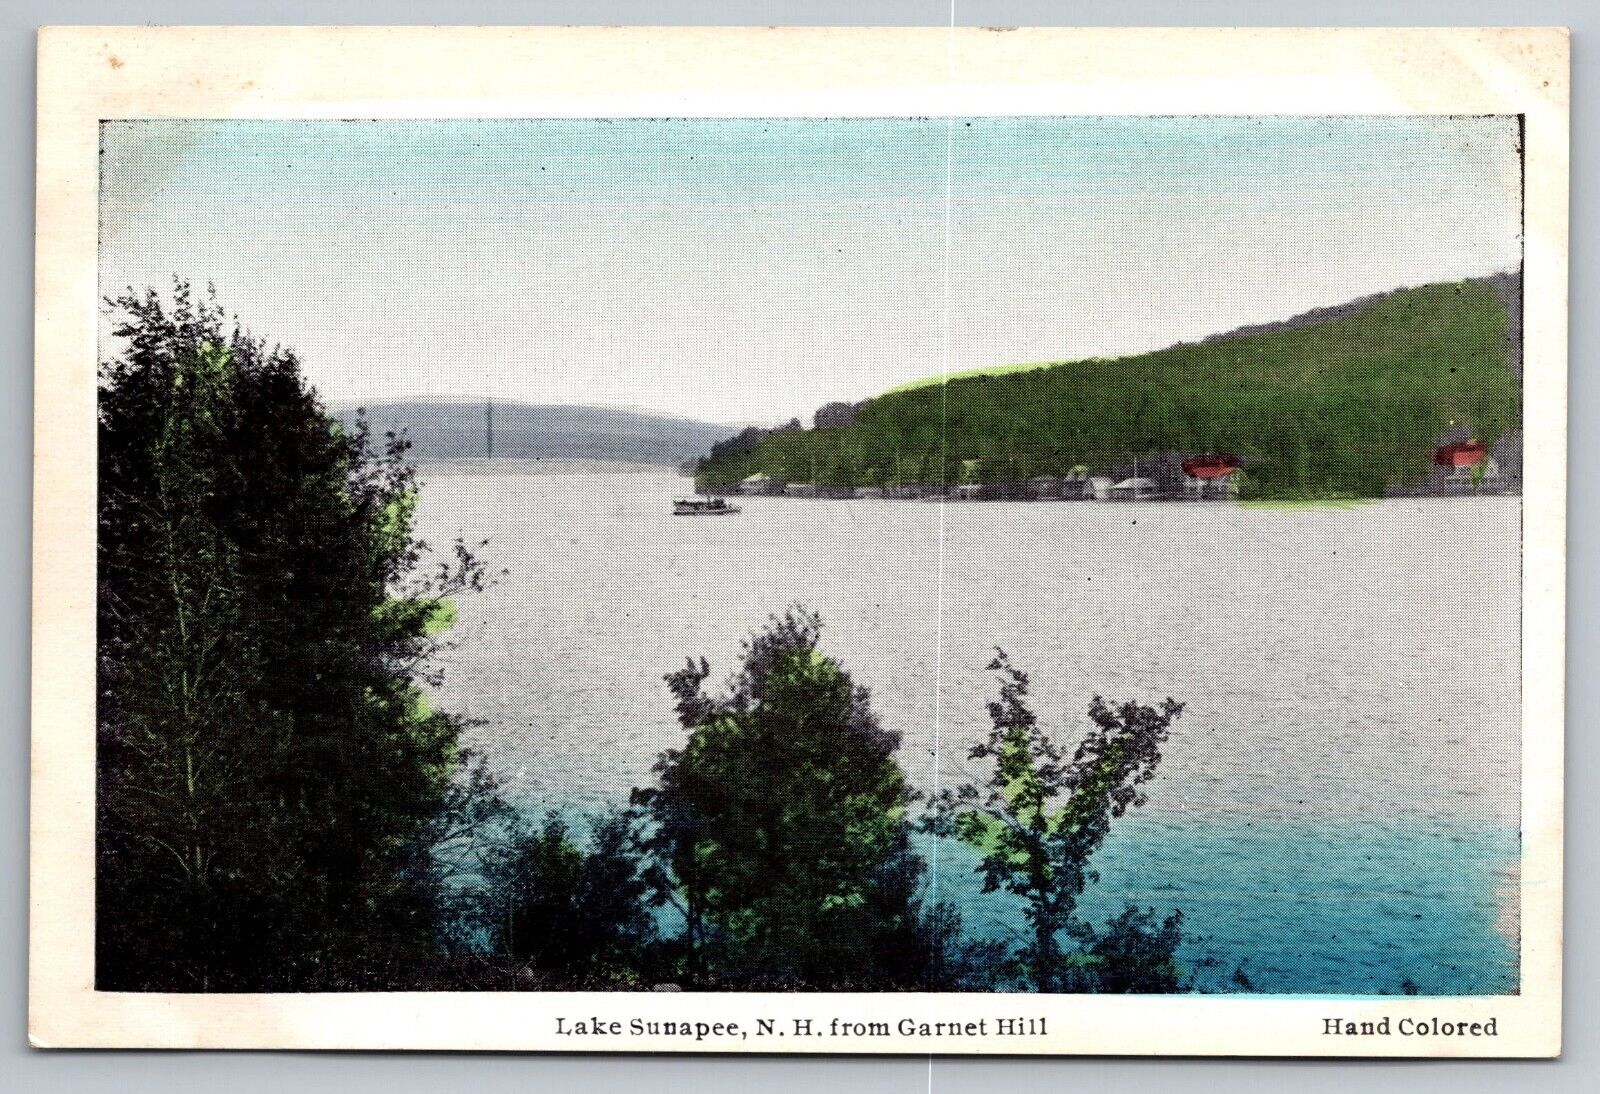 Lake Sunapee from Garnet Hill.  New Hampshire Vintage Postcard. Hand Colored